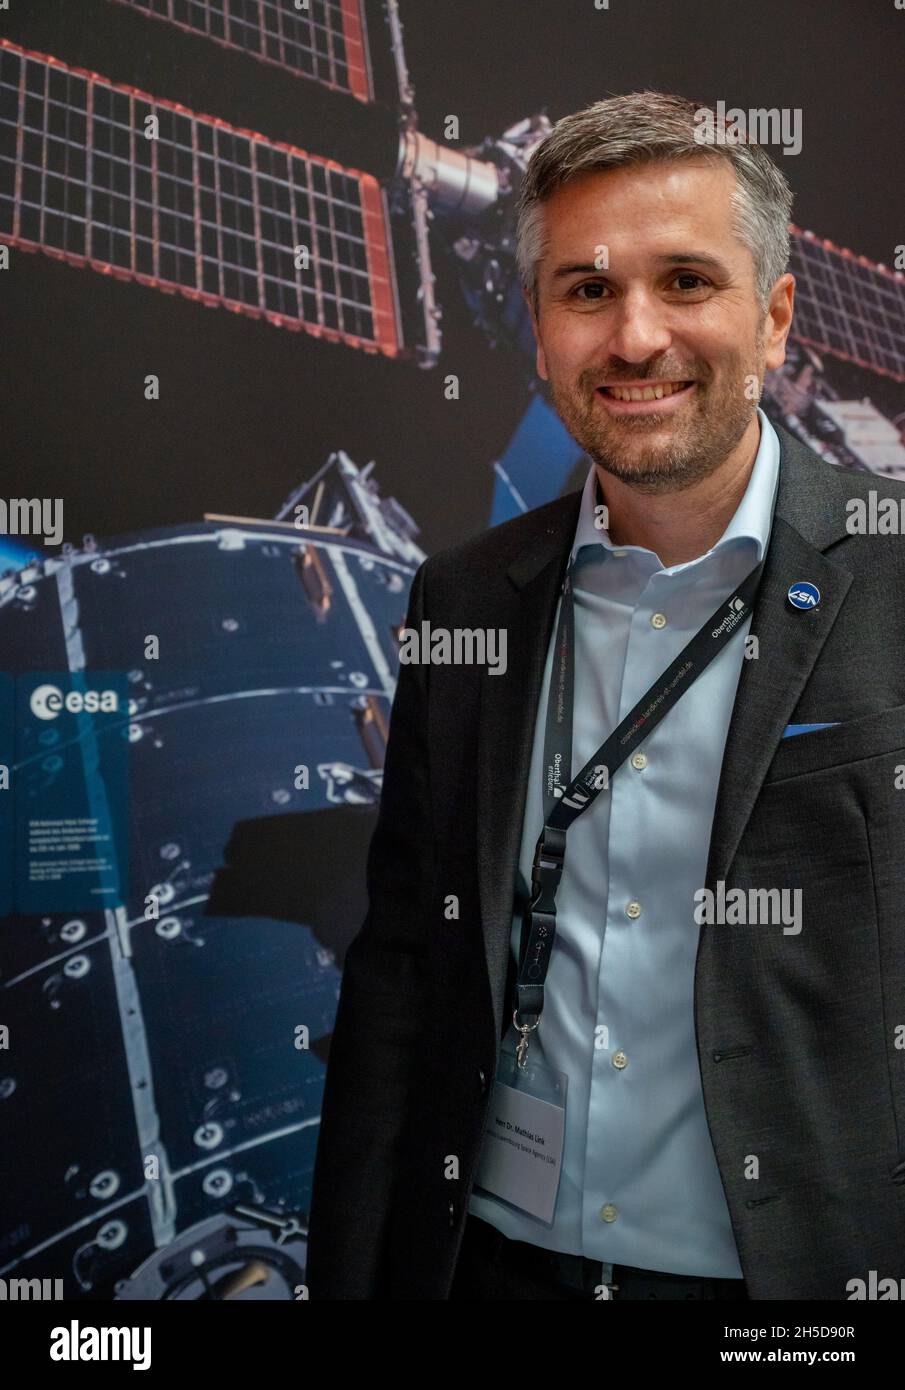 Oberthal, Germany. 31st Oct, 2021. Mathias Link, director of the Luxembourg Space Agency LSA, stands in front of a poster of the space station at the launch party for the postponed launch of the ISS. In the meantime, 70 companies and research institutes have settled in Luxembourg around the topic of space travel, says Link. (to dpa-text: Luxembourg focuses on the use of space resources) Credit: Harald Tittel/dpa/Alamy Live News Stock Photo